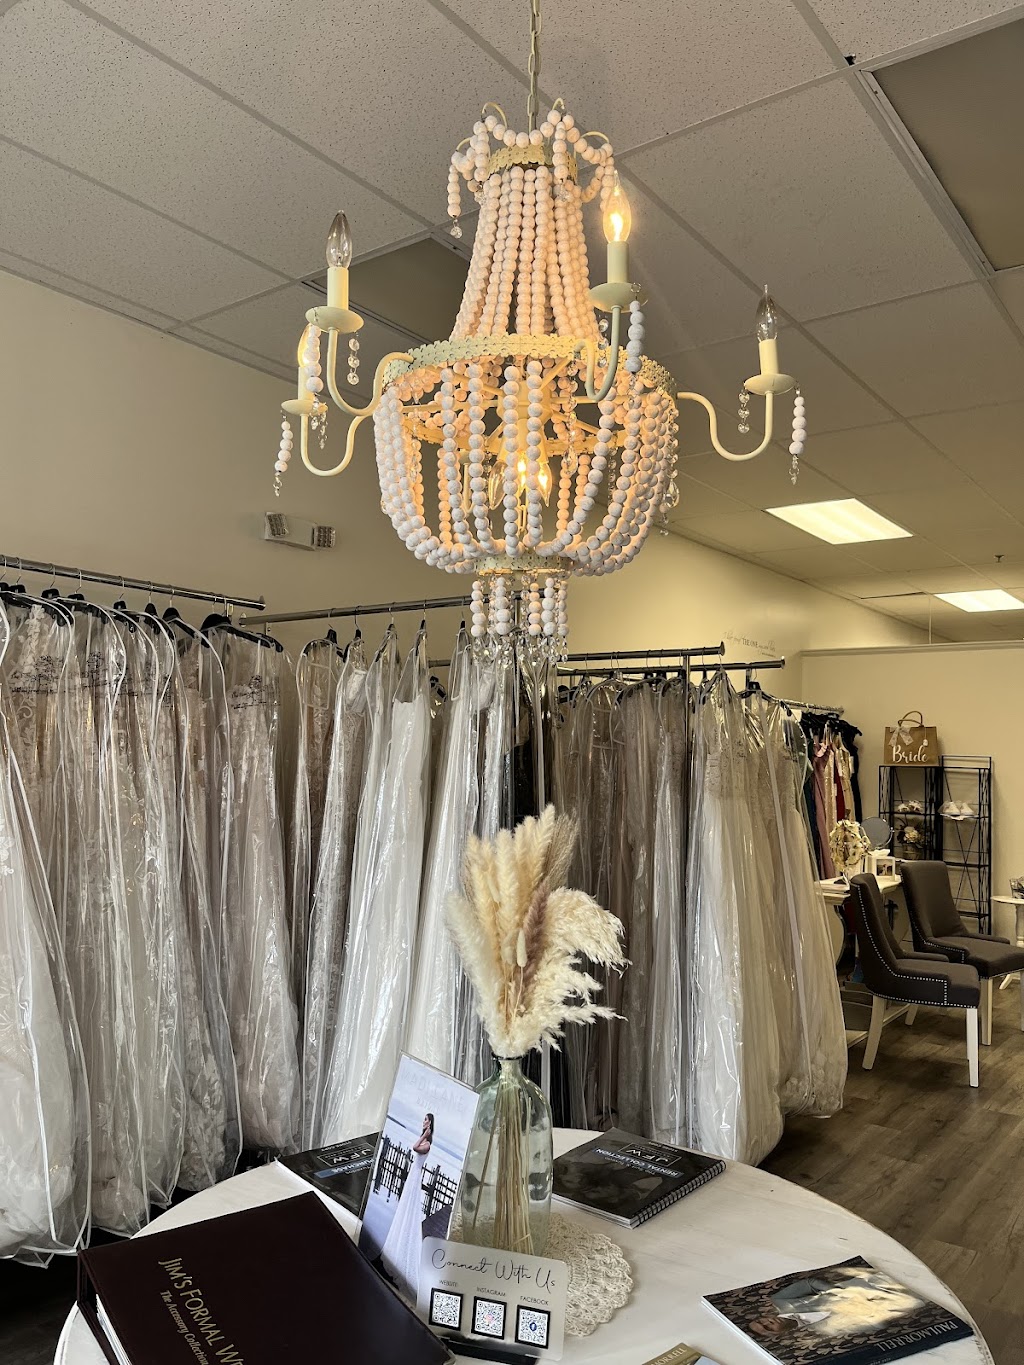 The Fancy Frock Bridal Boutique | 1045 Bruce B Downs Blvd, Wesley Chapel, FL 33544, USA | Phone: (813) 973-1999